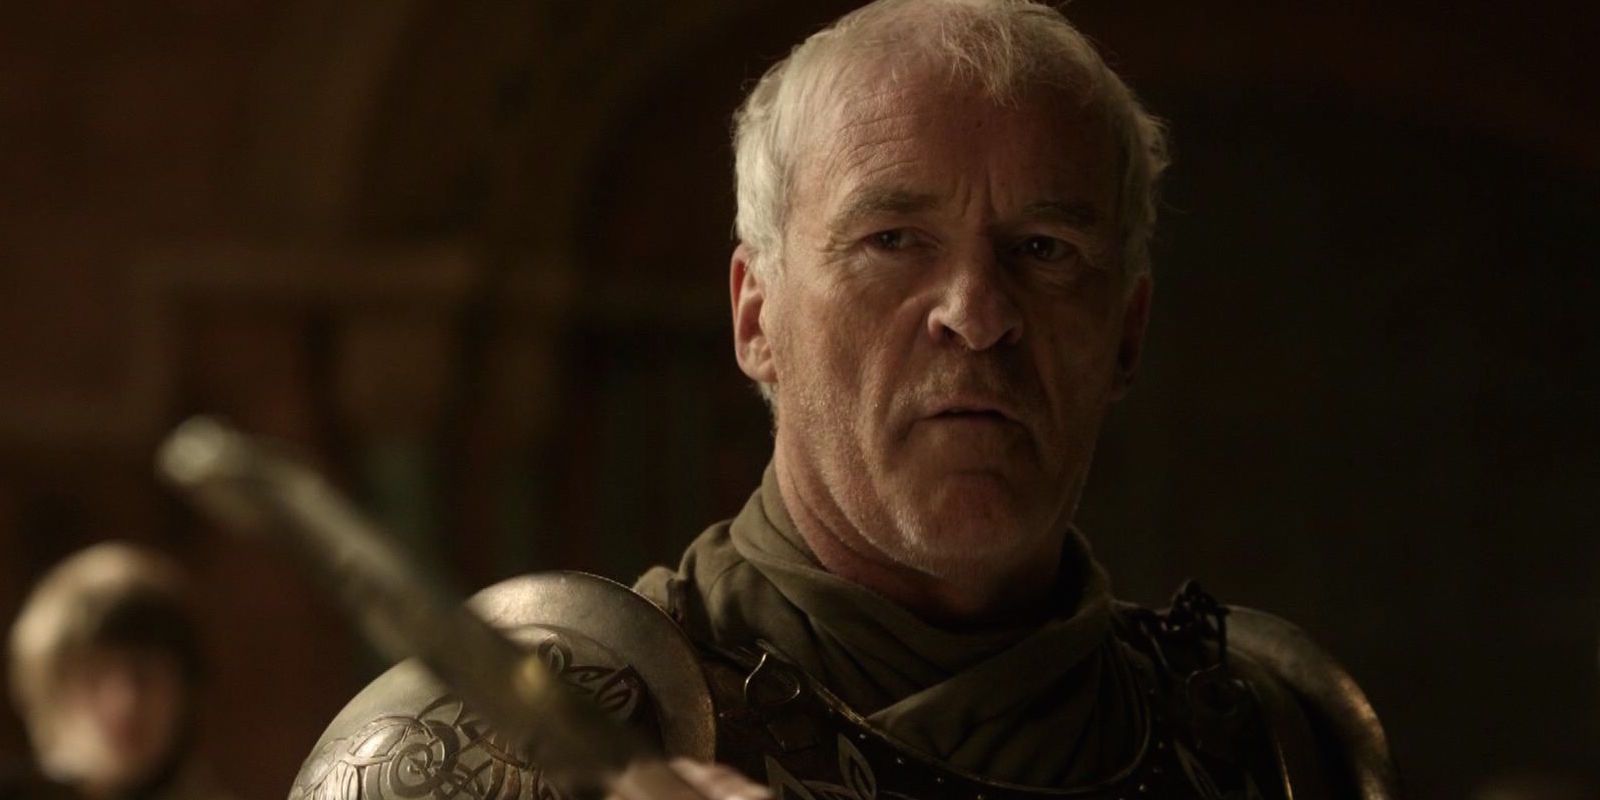 Ser Barristan Selmy points sword at Joffrey on Game of Thrones